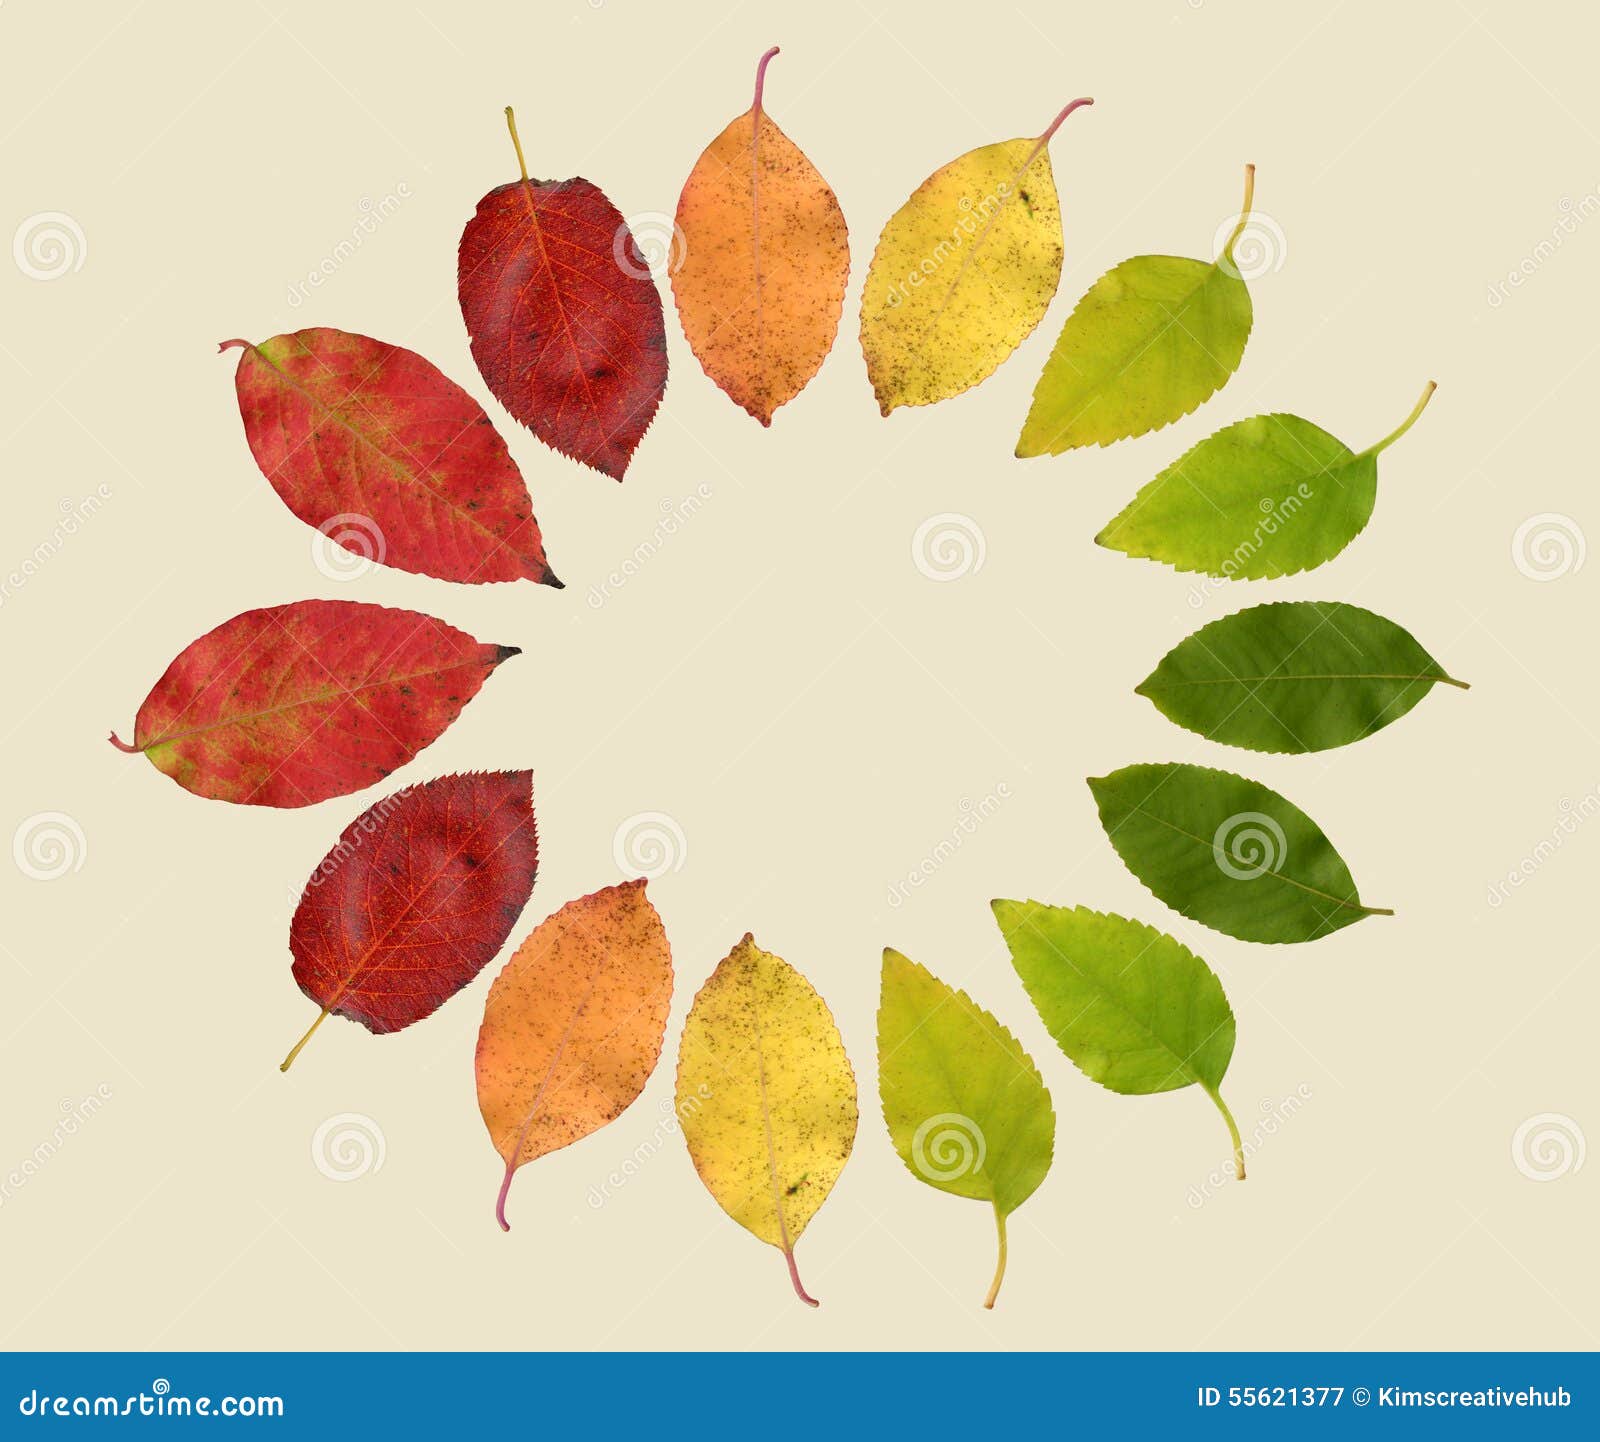 Autumn Leaves In Different Colors Stock Photo - Image: 55621377